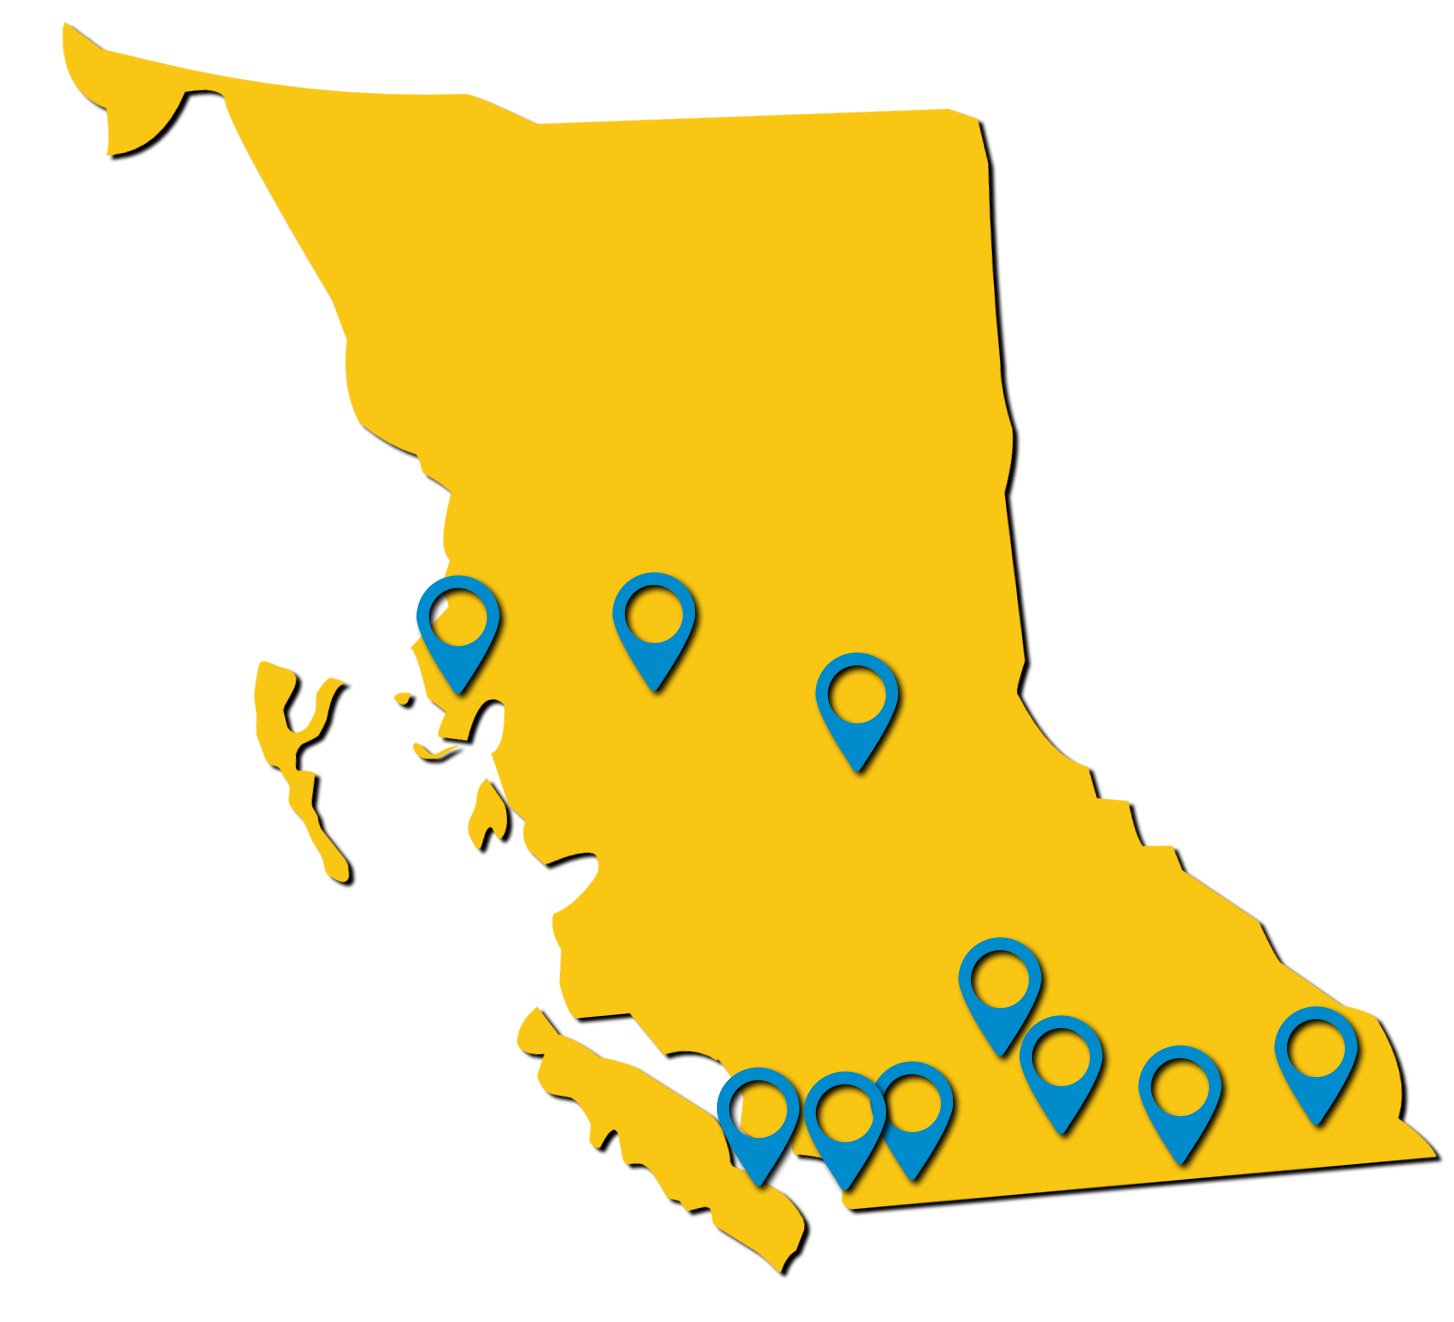 Map of British Columbia showing tour stops